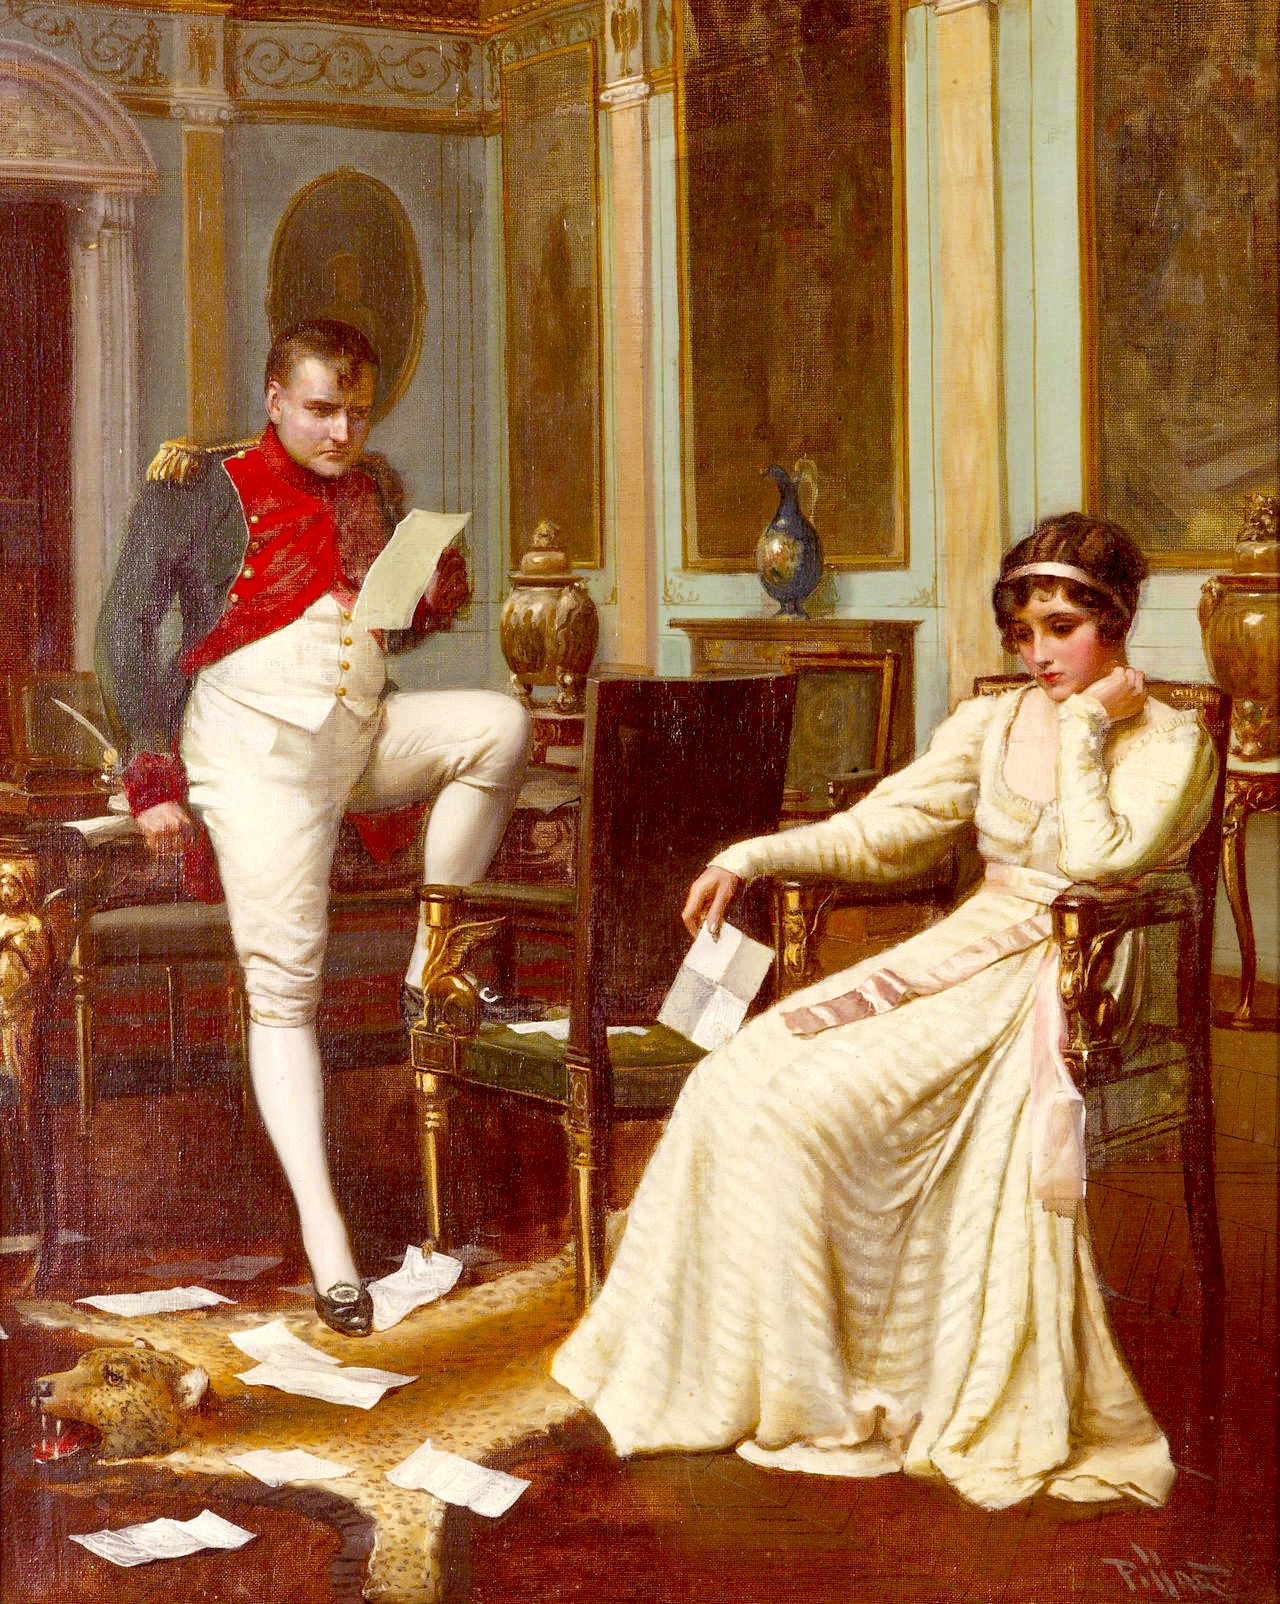 This painting depicts a man, Napoleon, and a woman, Josephine. The woman is wearing a white dress with intricate lace detailing, while the man is wearing white pants and a long blue and red jacket. On the floor are papers scattered around their feet, along with what appears to be a vase and other decorative items nearby.